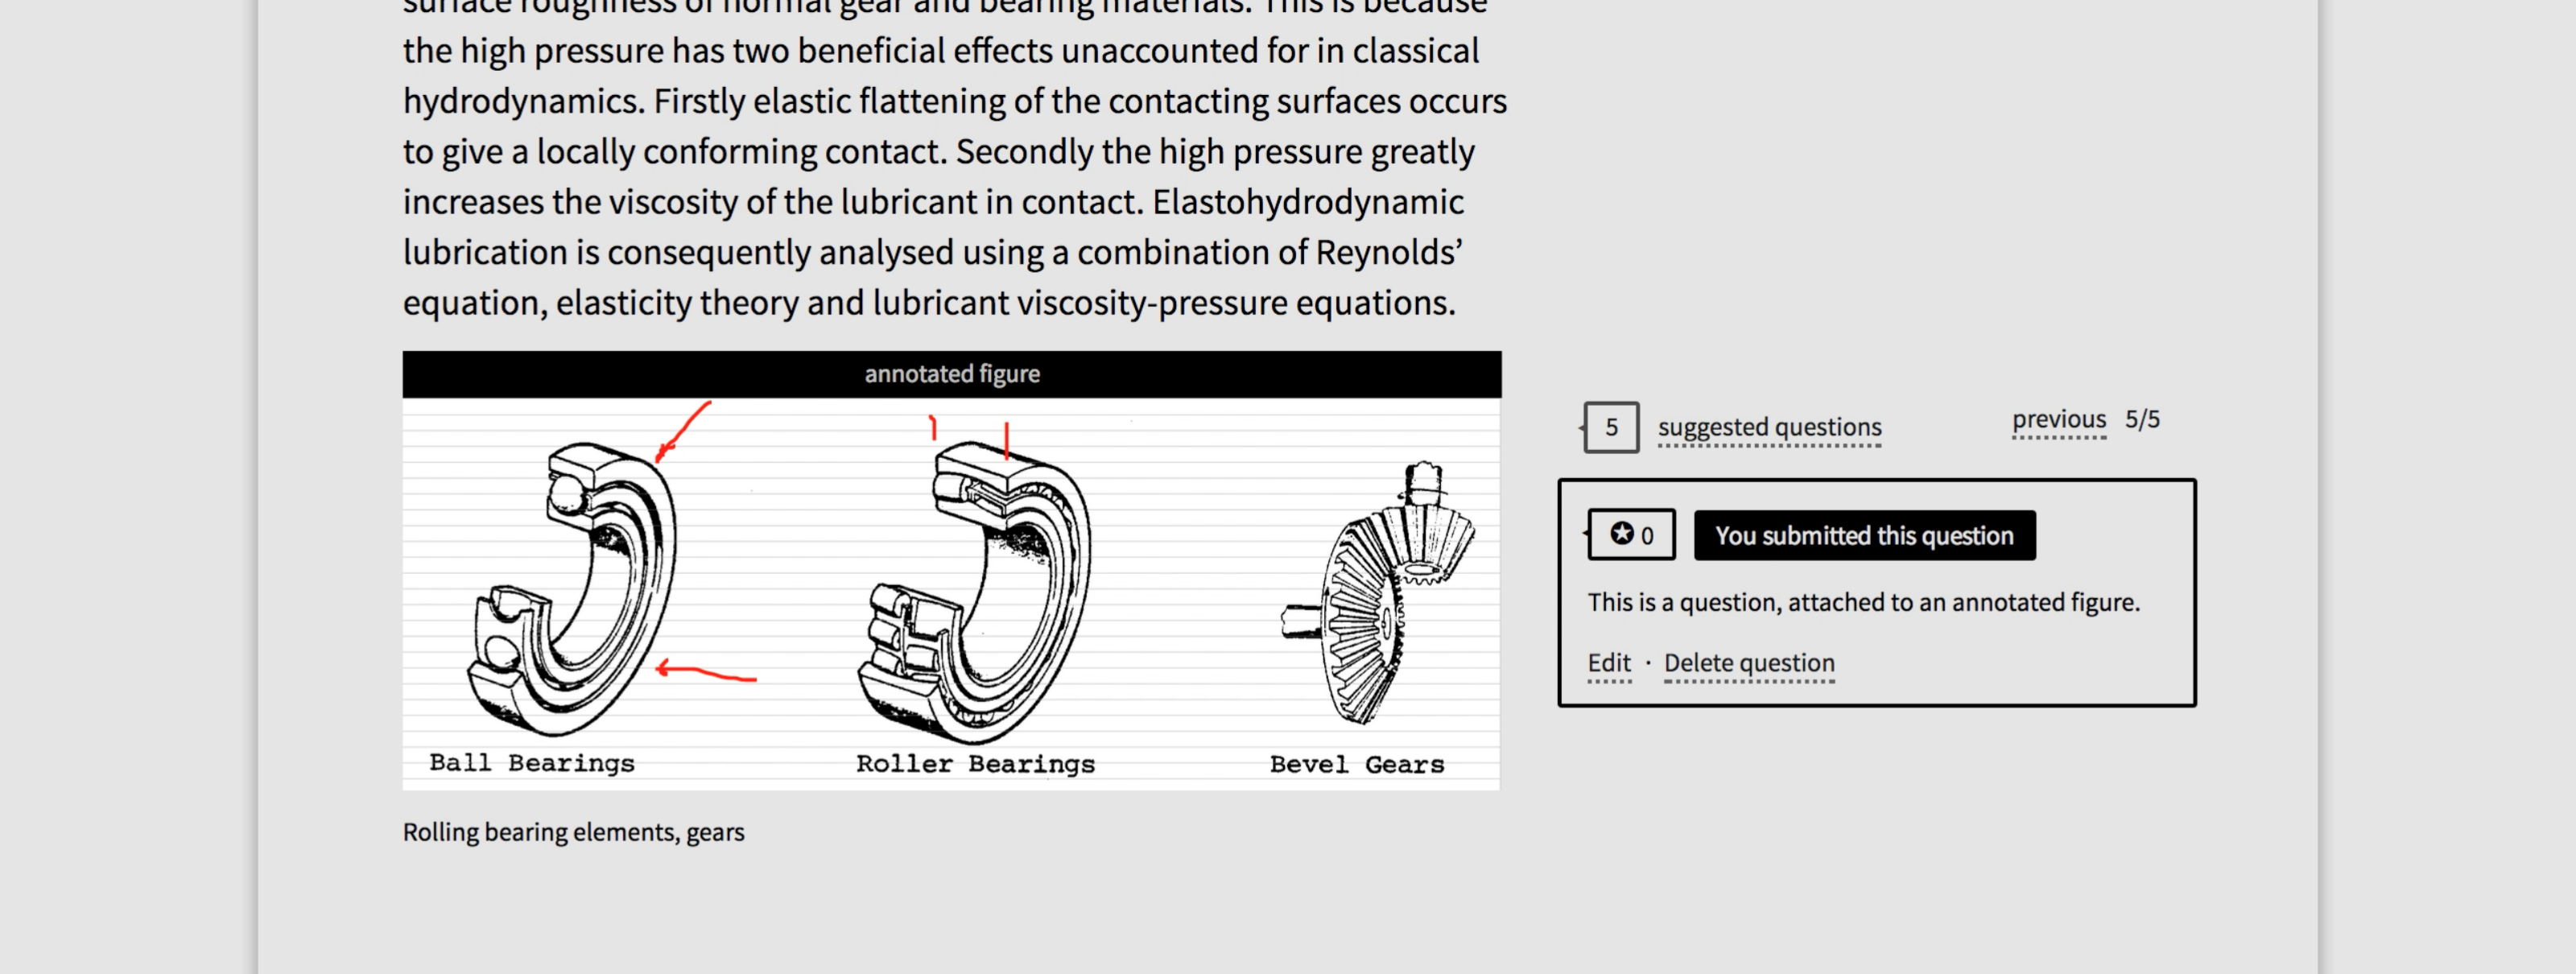 Screenshot showing a student submission of an open-ended ended question about a figure with their own annotations.